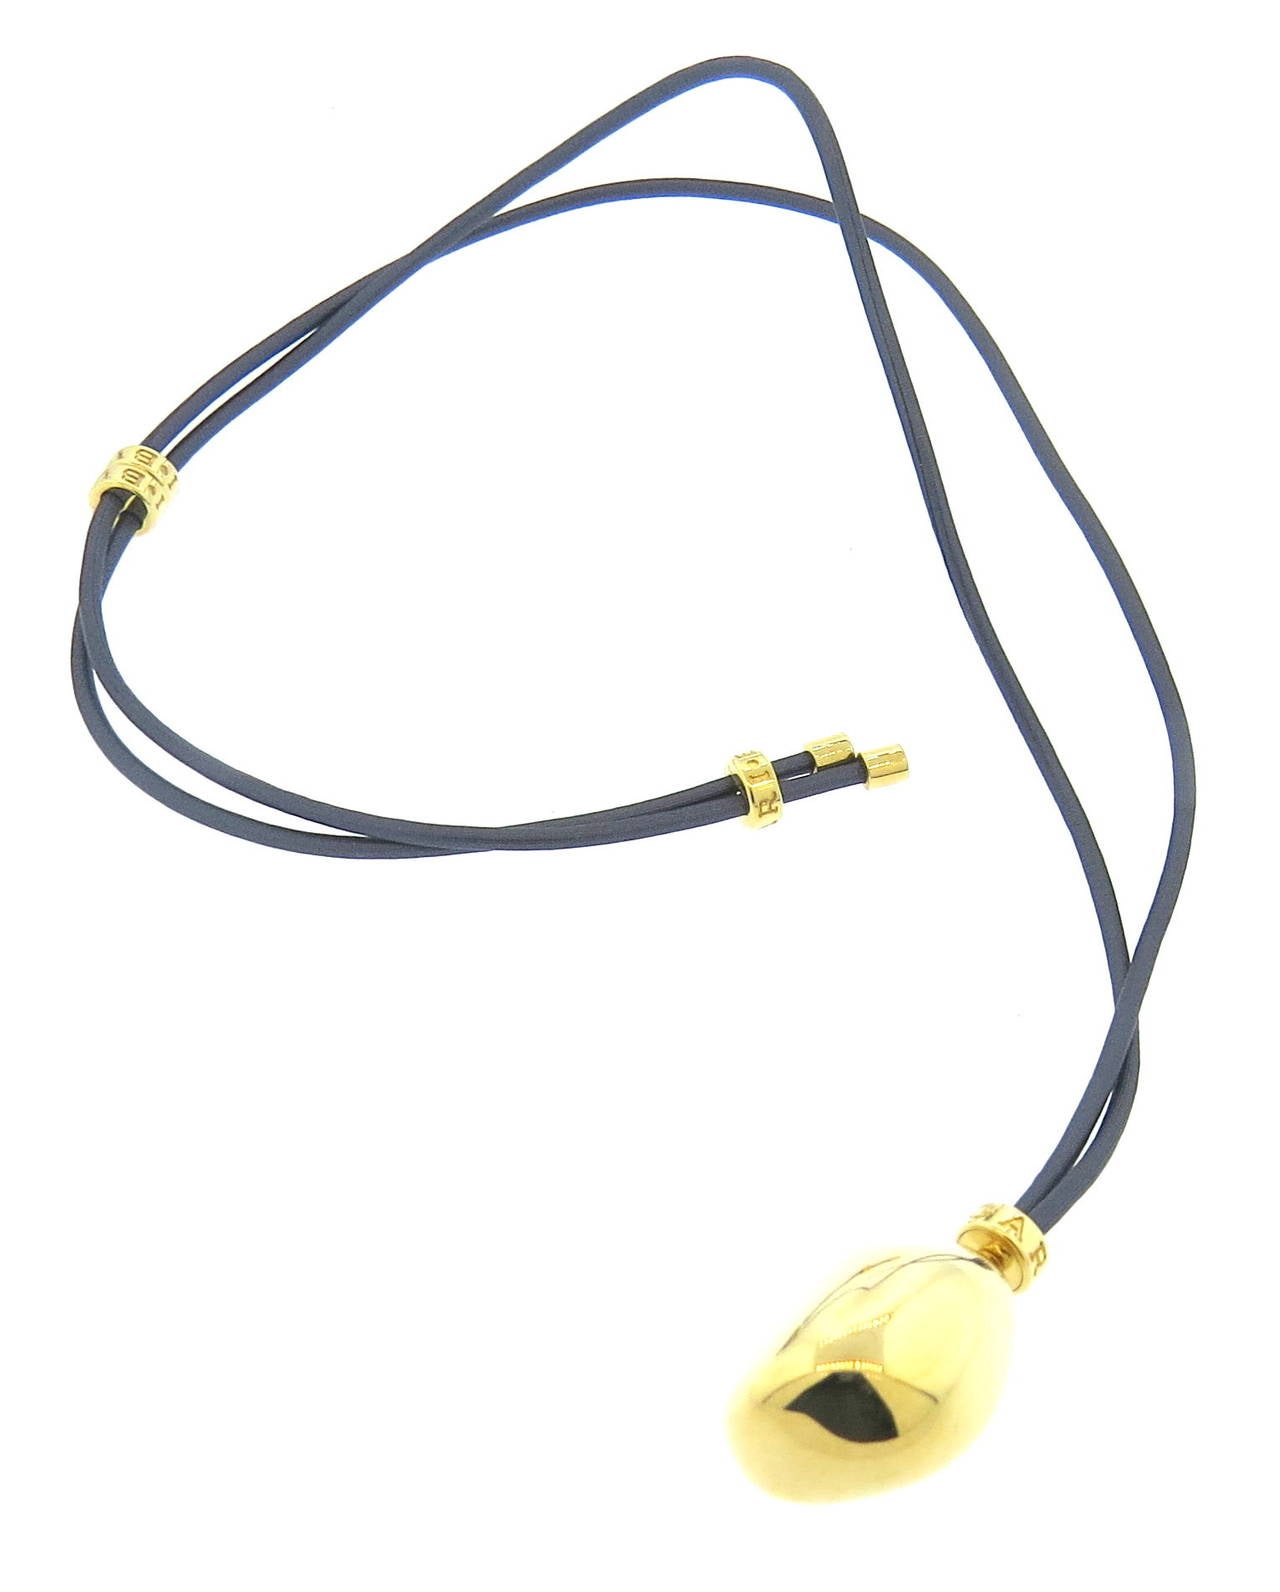 18k gold pendant on a cord by Bulgari from Sassi collection Cord is adjustable up to 28